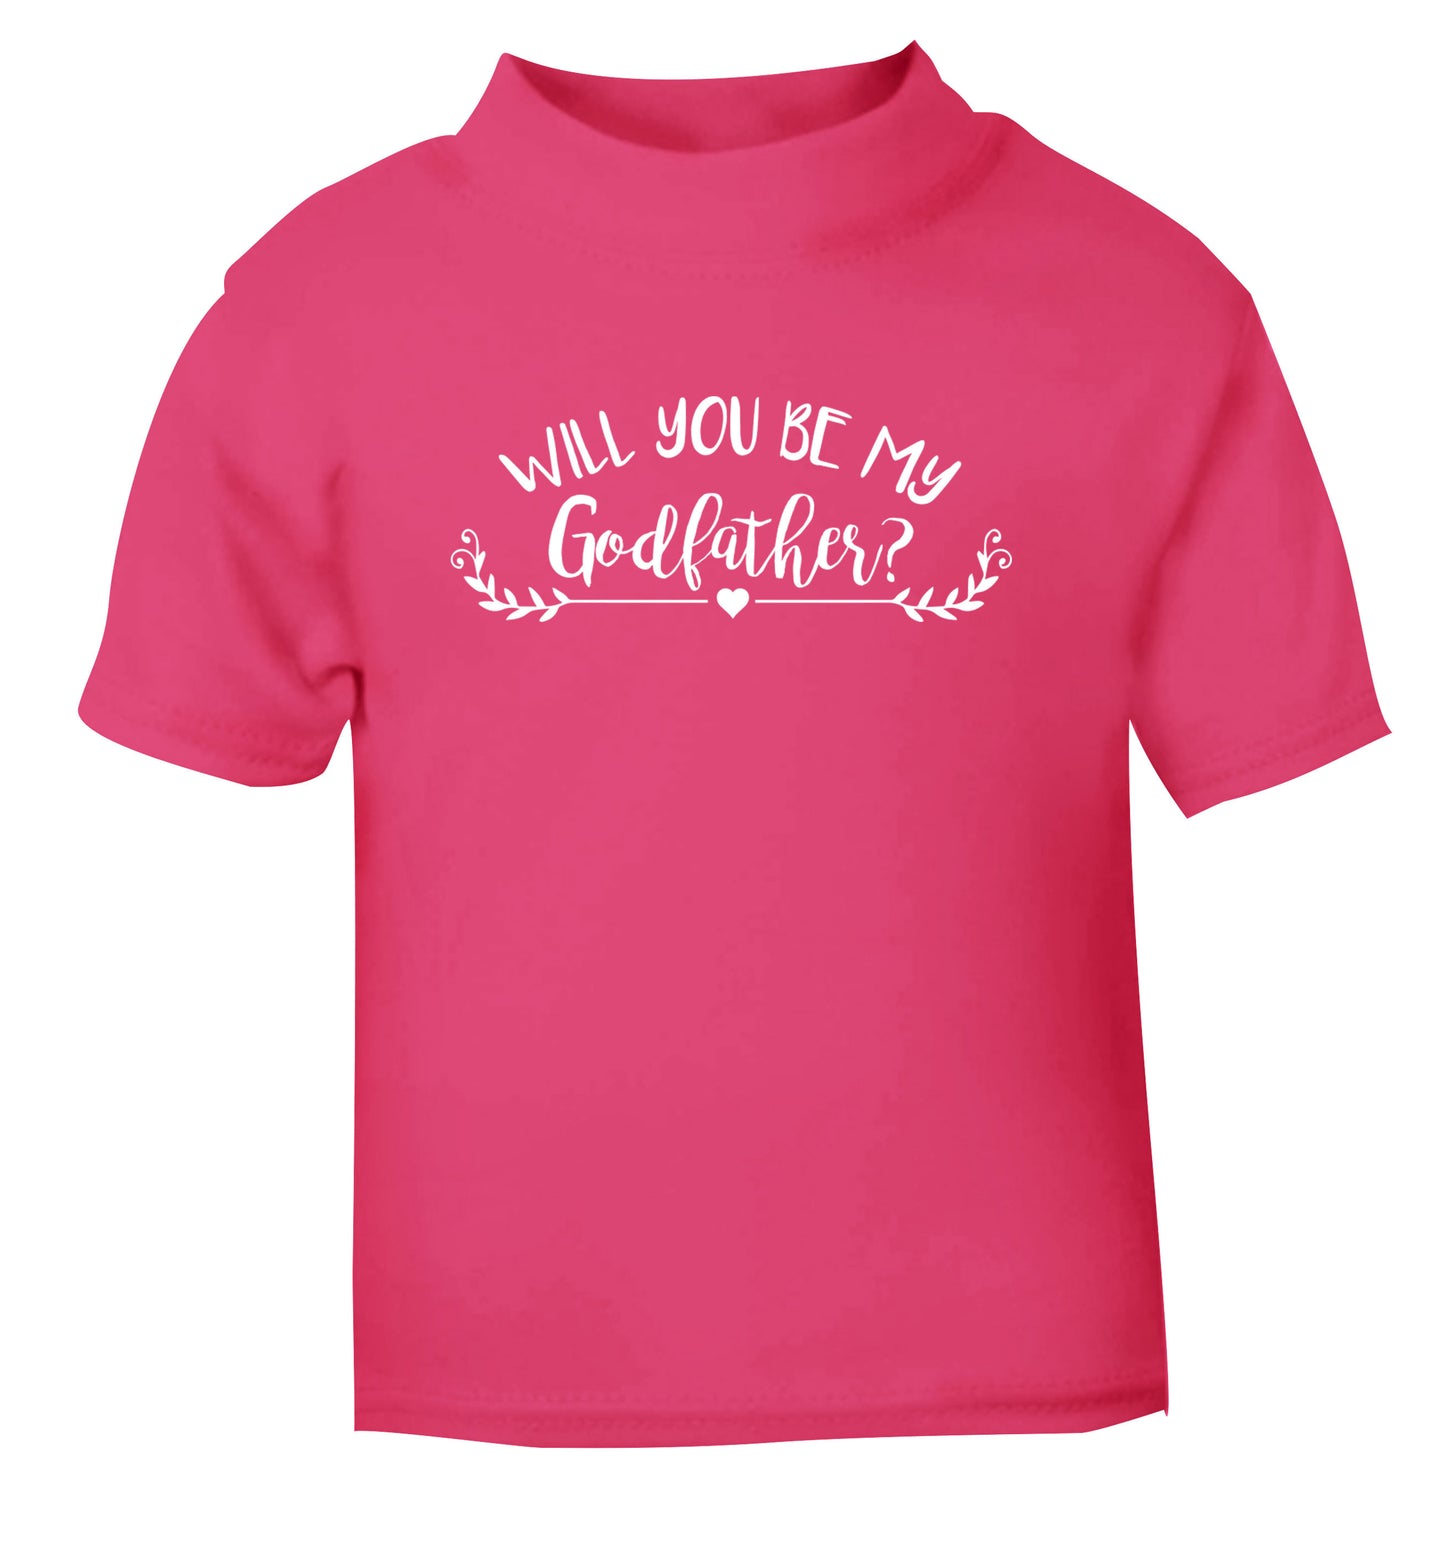 Will you be my godfather? pink Baby Toddler Tshirt 2 Years